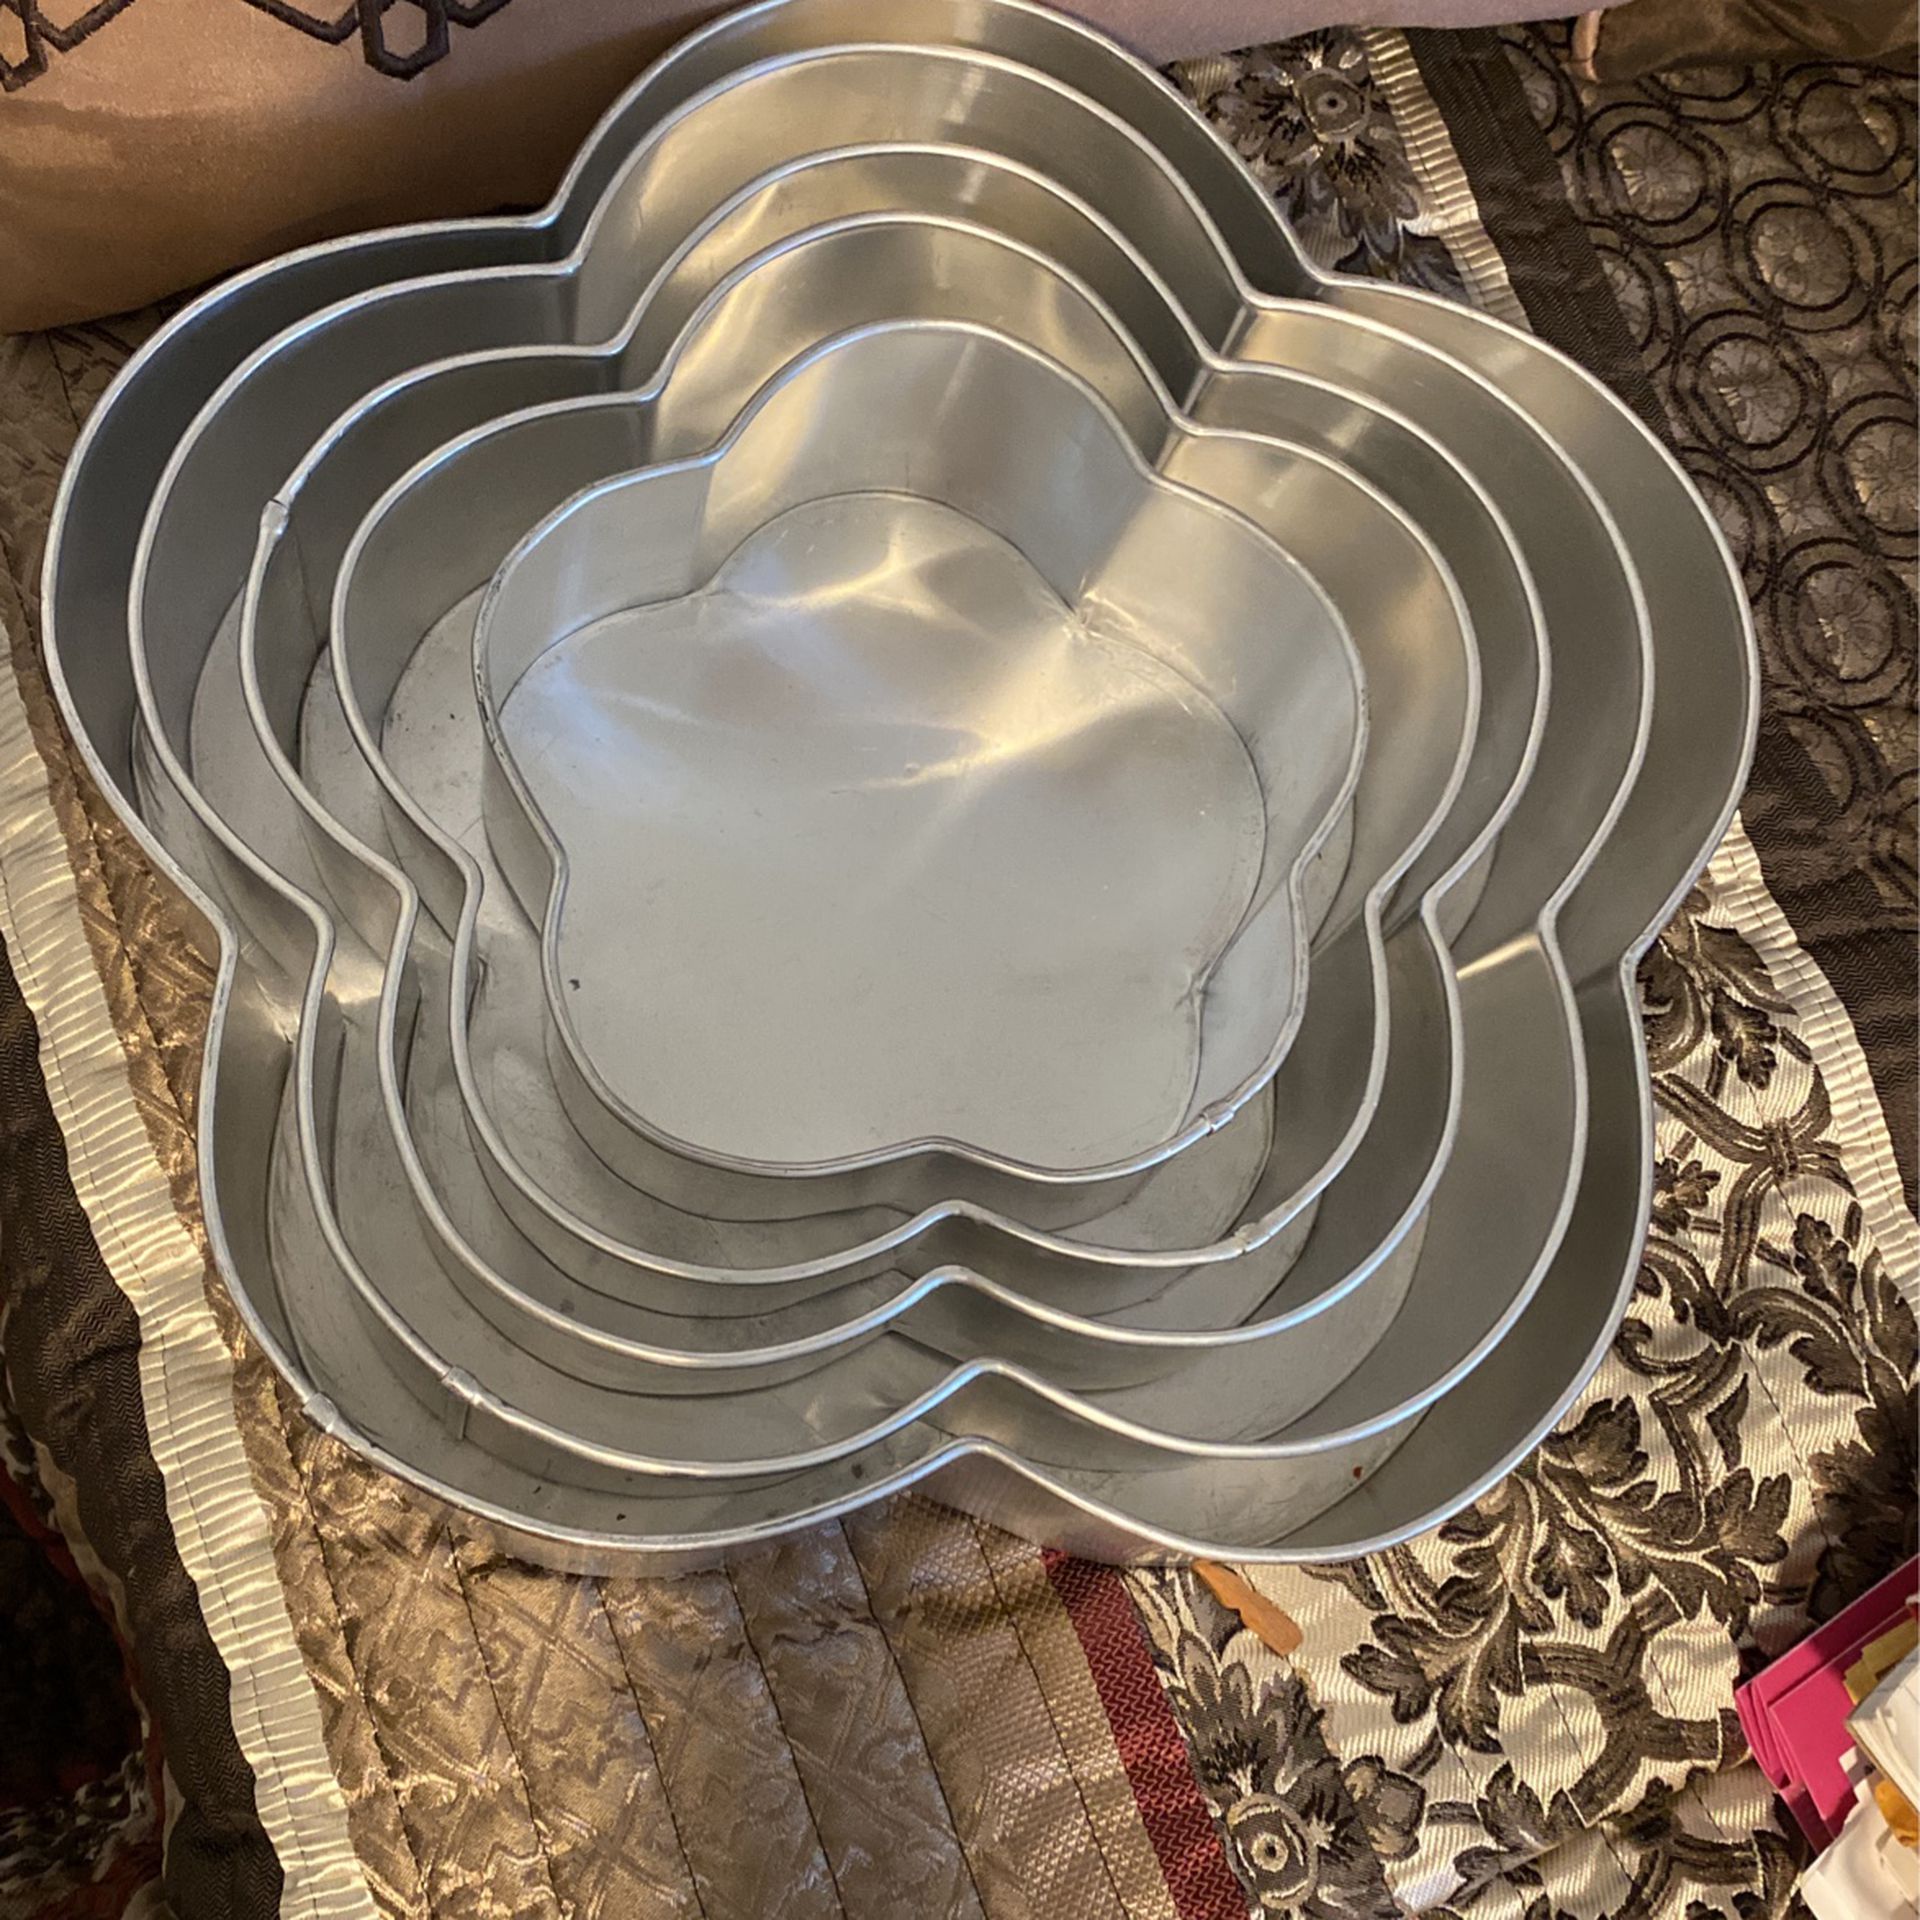 Boob cake pan with mini boob cake pan and lollipops for Sale in Austin, TX  - OfferUp